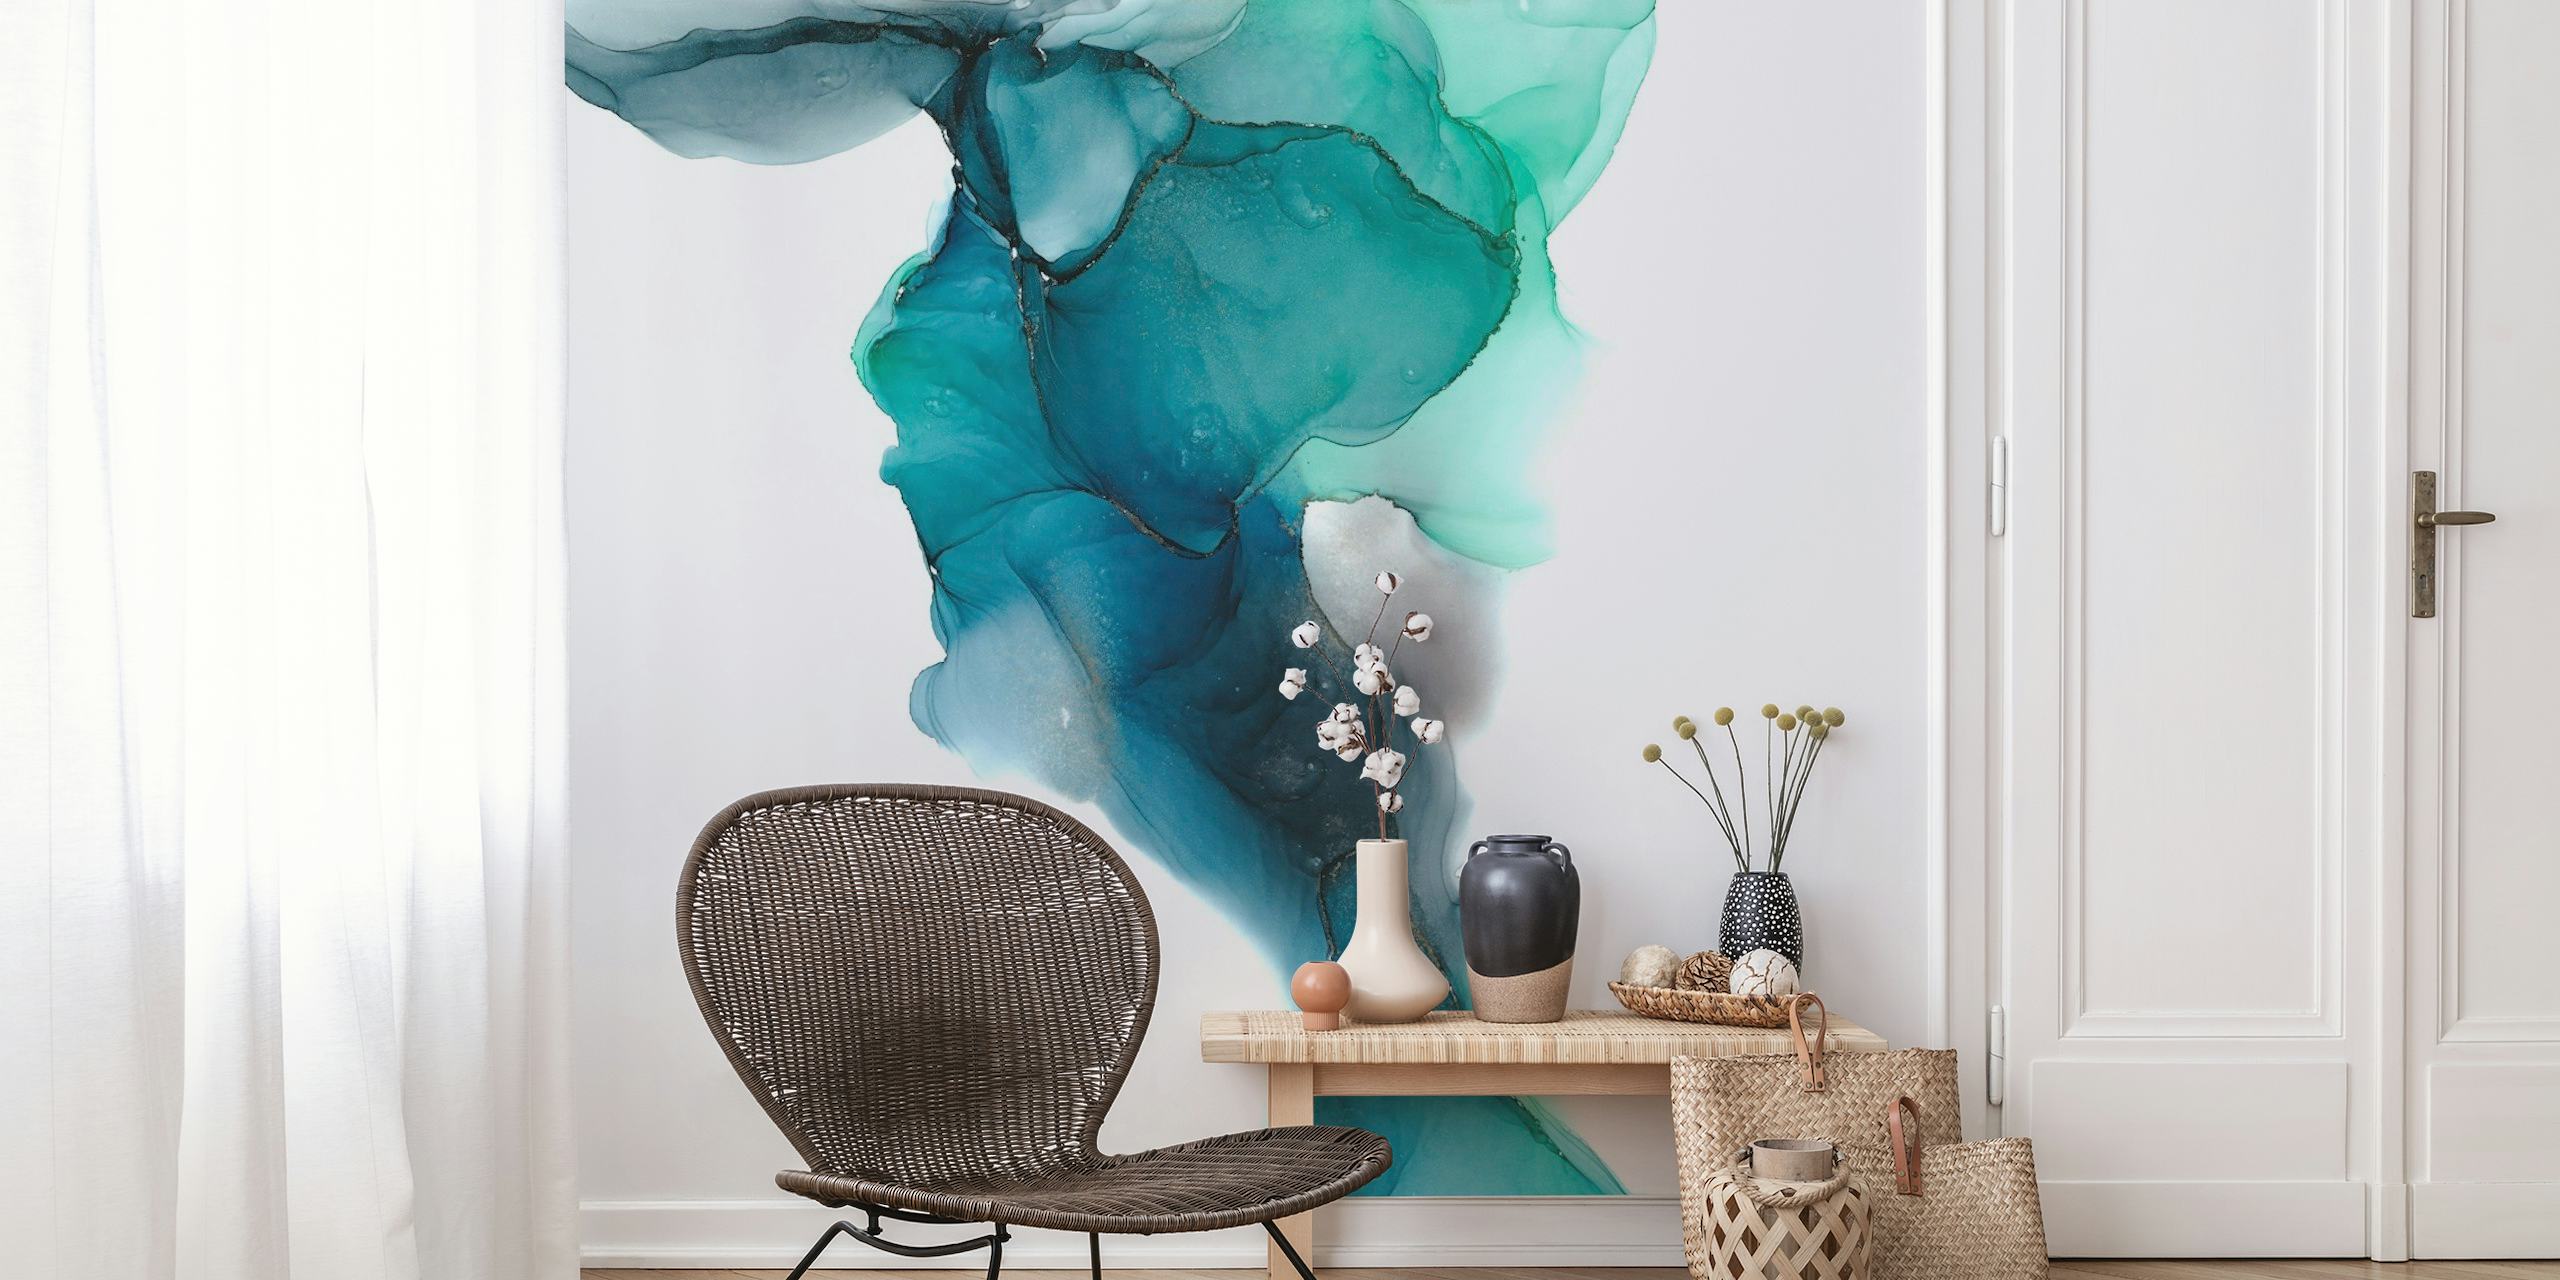 Abstract ocean-inspired wall mural with turquoise and green flowing colors